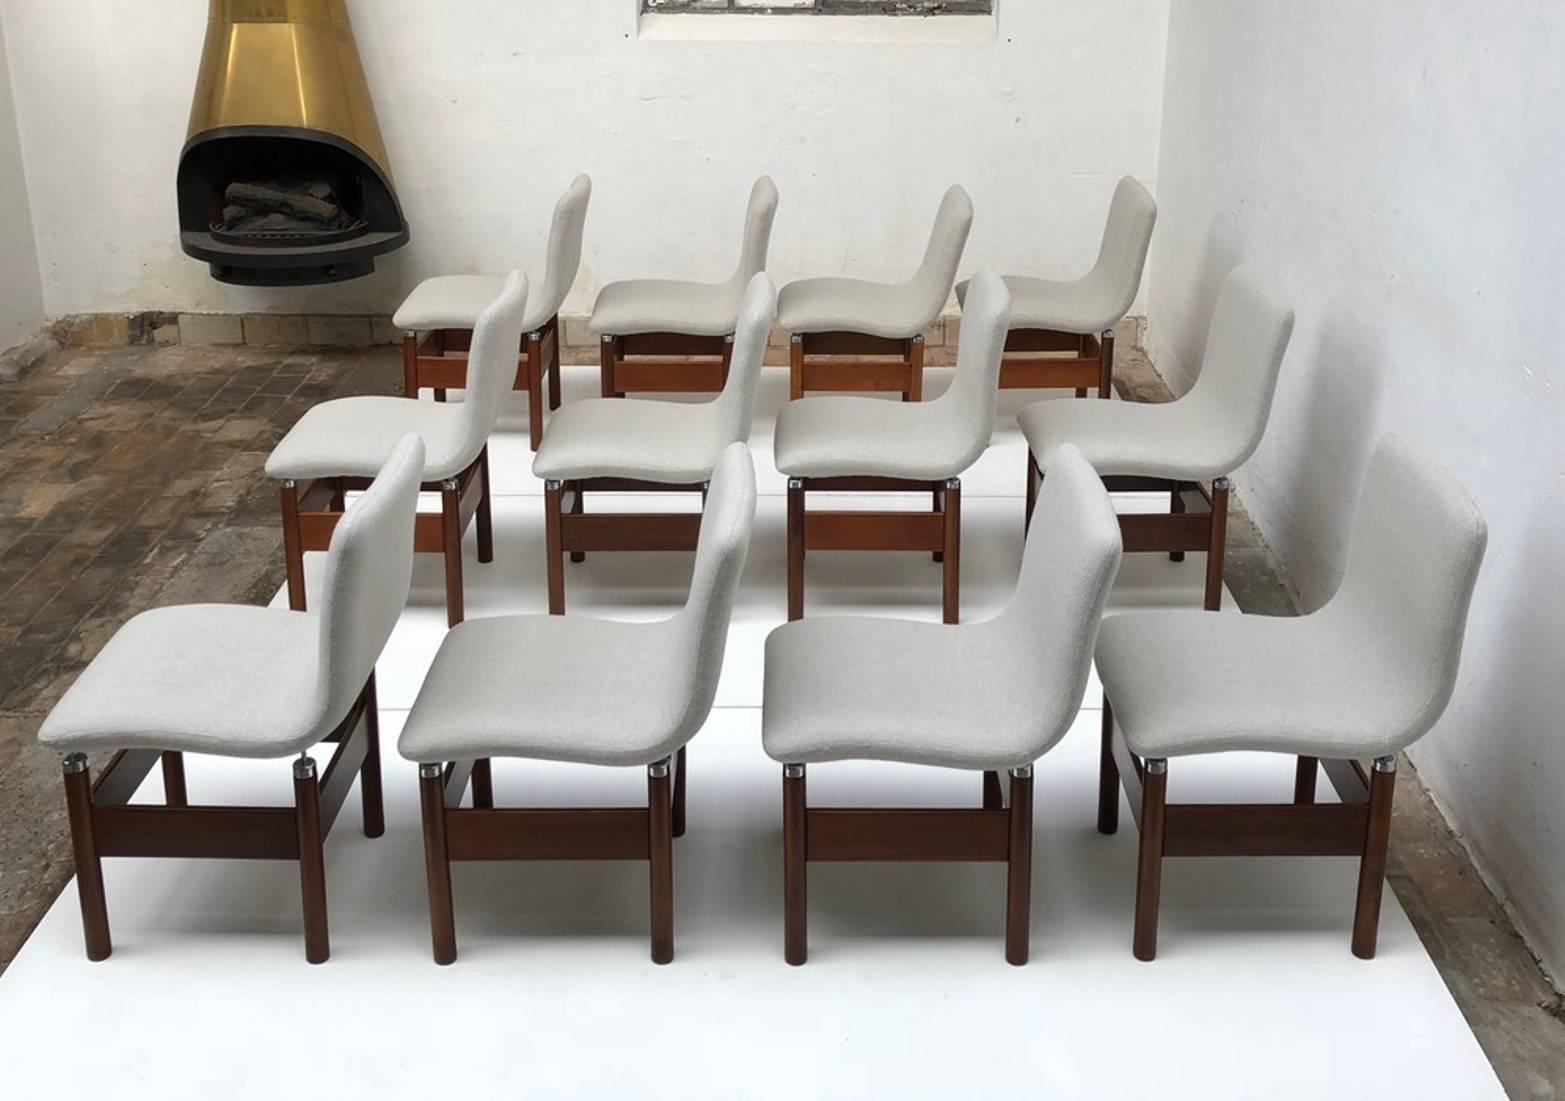 Mid-20th Century 12 'Chelsea' Dining Chairs by Introini, Saporiti 1966, Upholstery Fully Restored For Sale